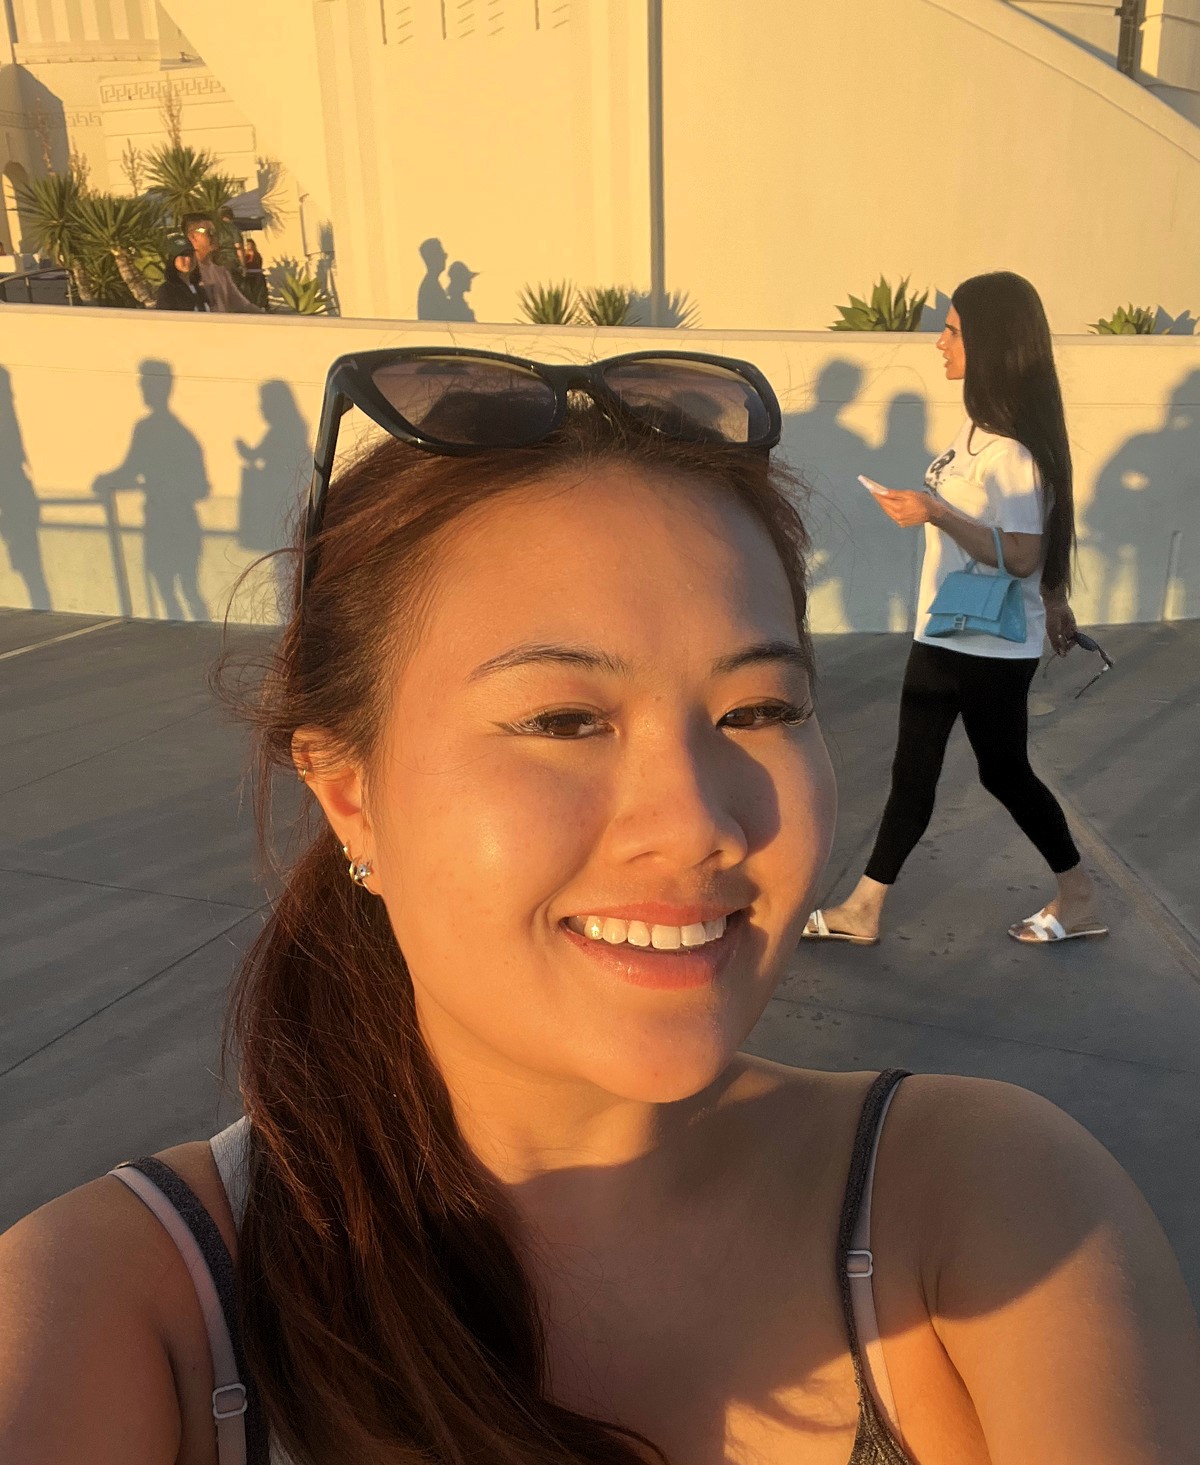 24-year-old Jane juggles two full-time remote jobs, working 73 hours a week to save $120,000 annually, aiming for early retirement by her 30s. Her journey goes viral on TikTok.